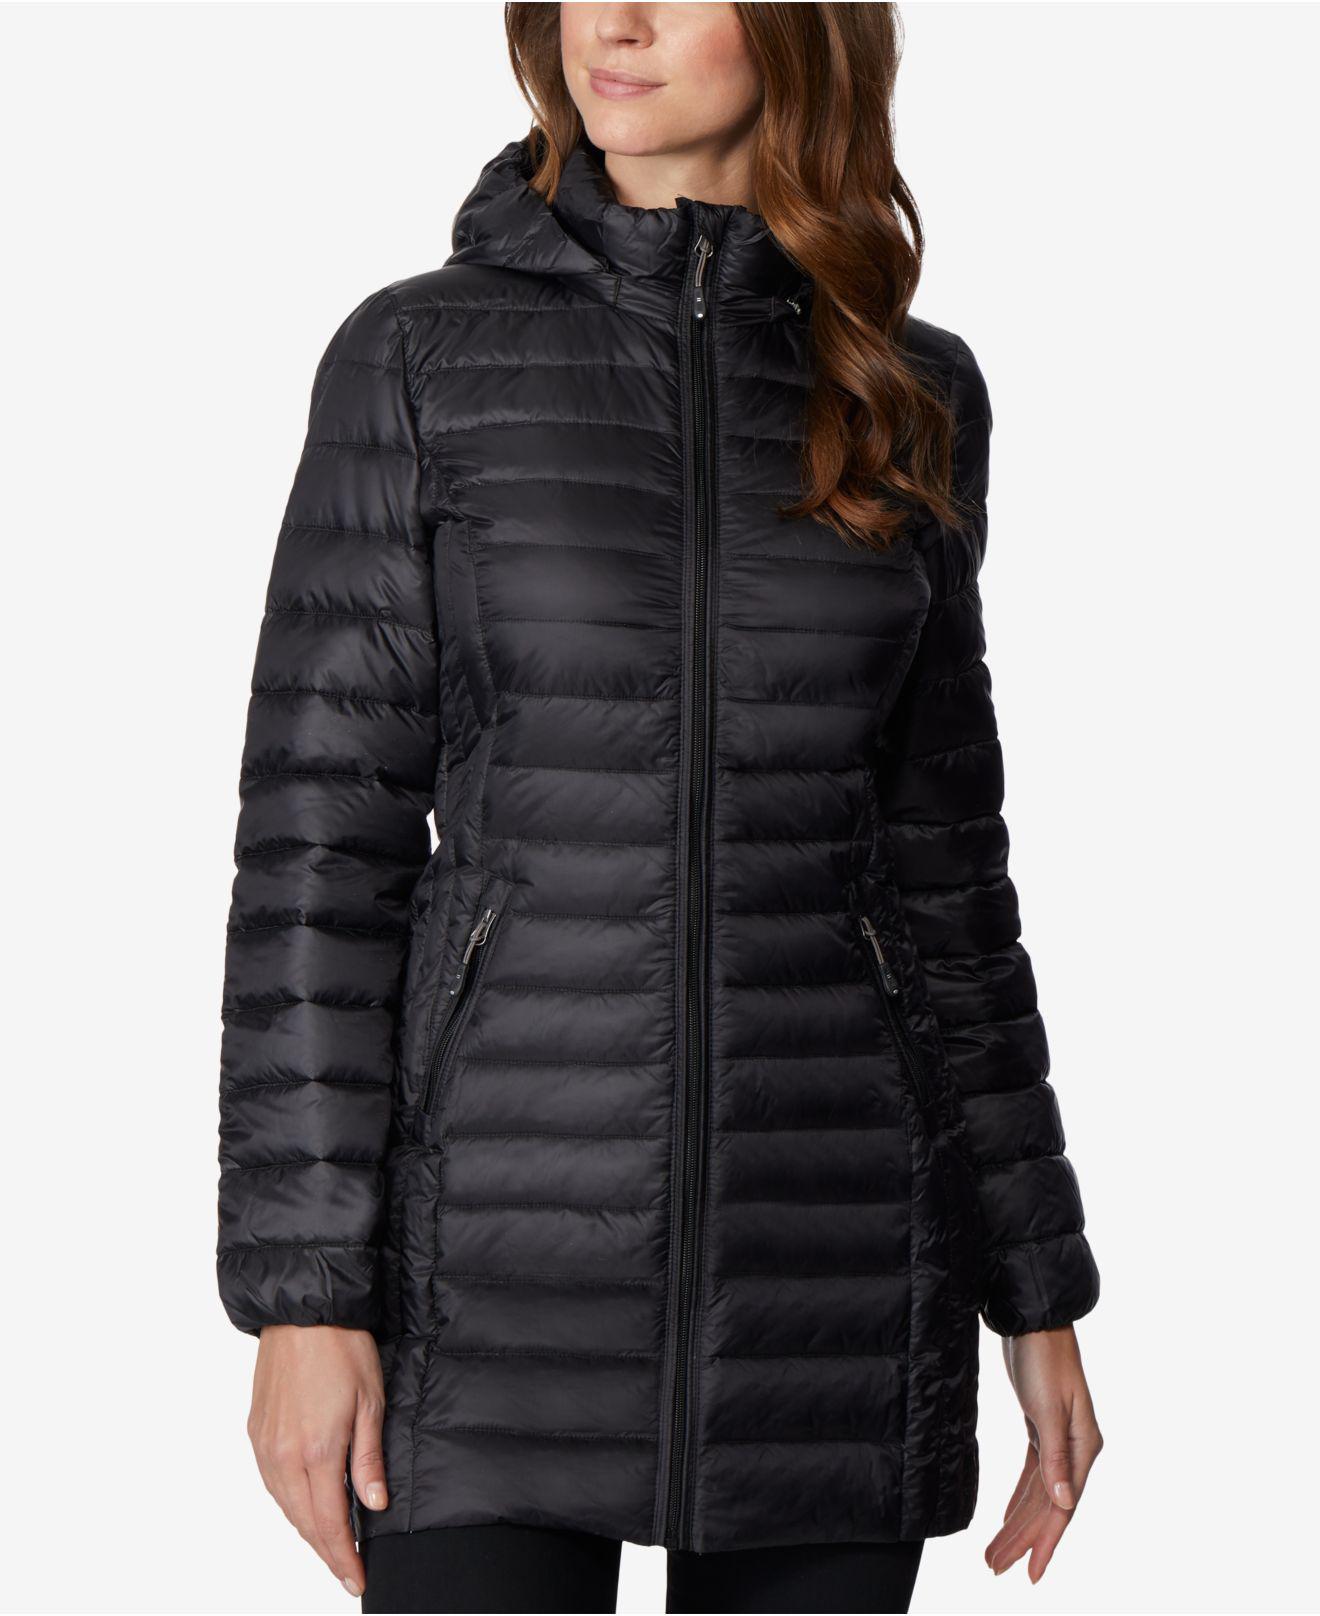 32 Degrees Hooded Packable Down Puffer Coat in Black - Lyst